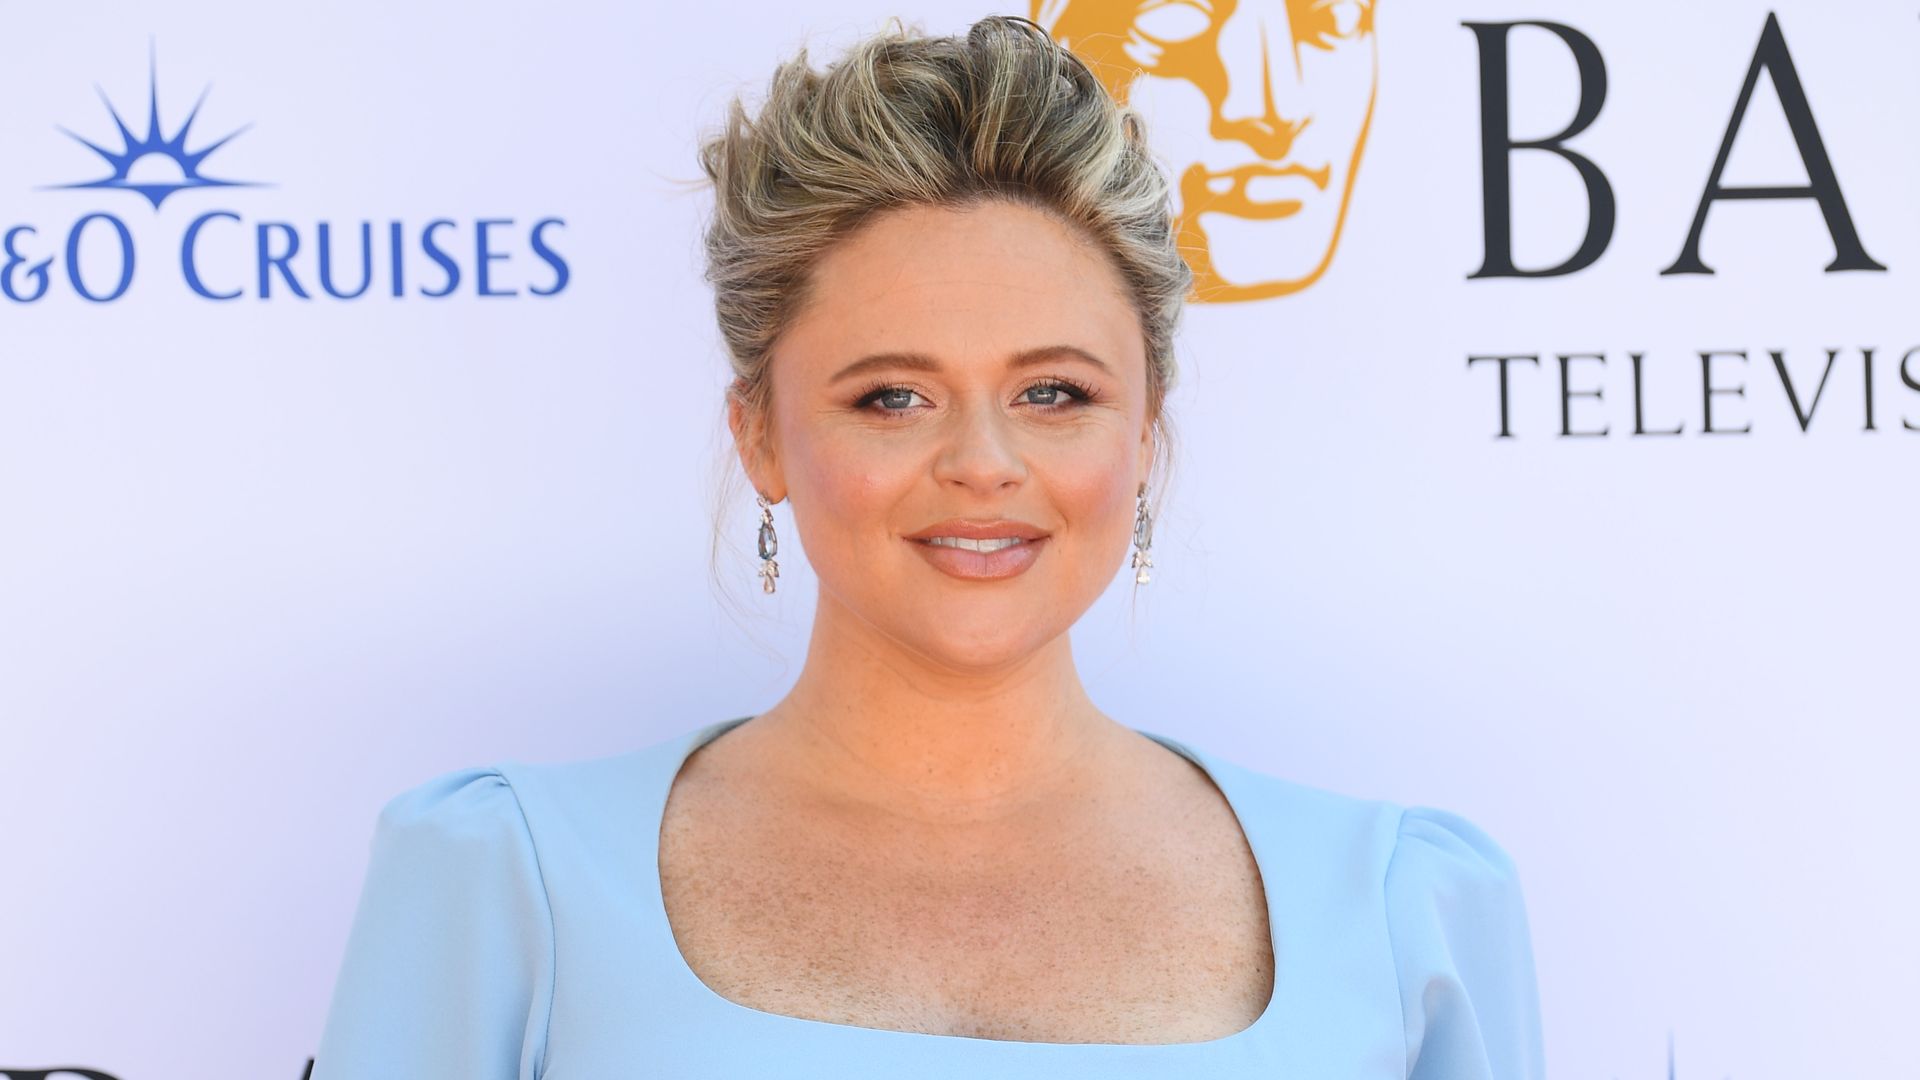 Emily Atack cradling her baby bump in a baby blue dress